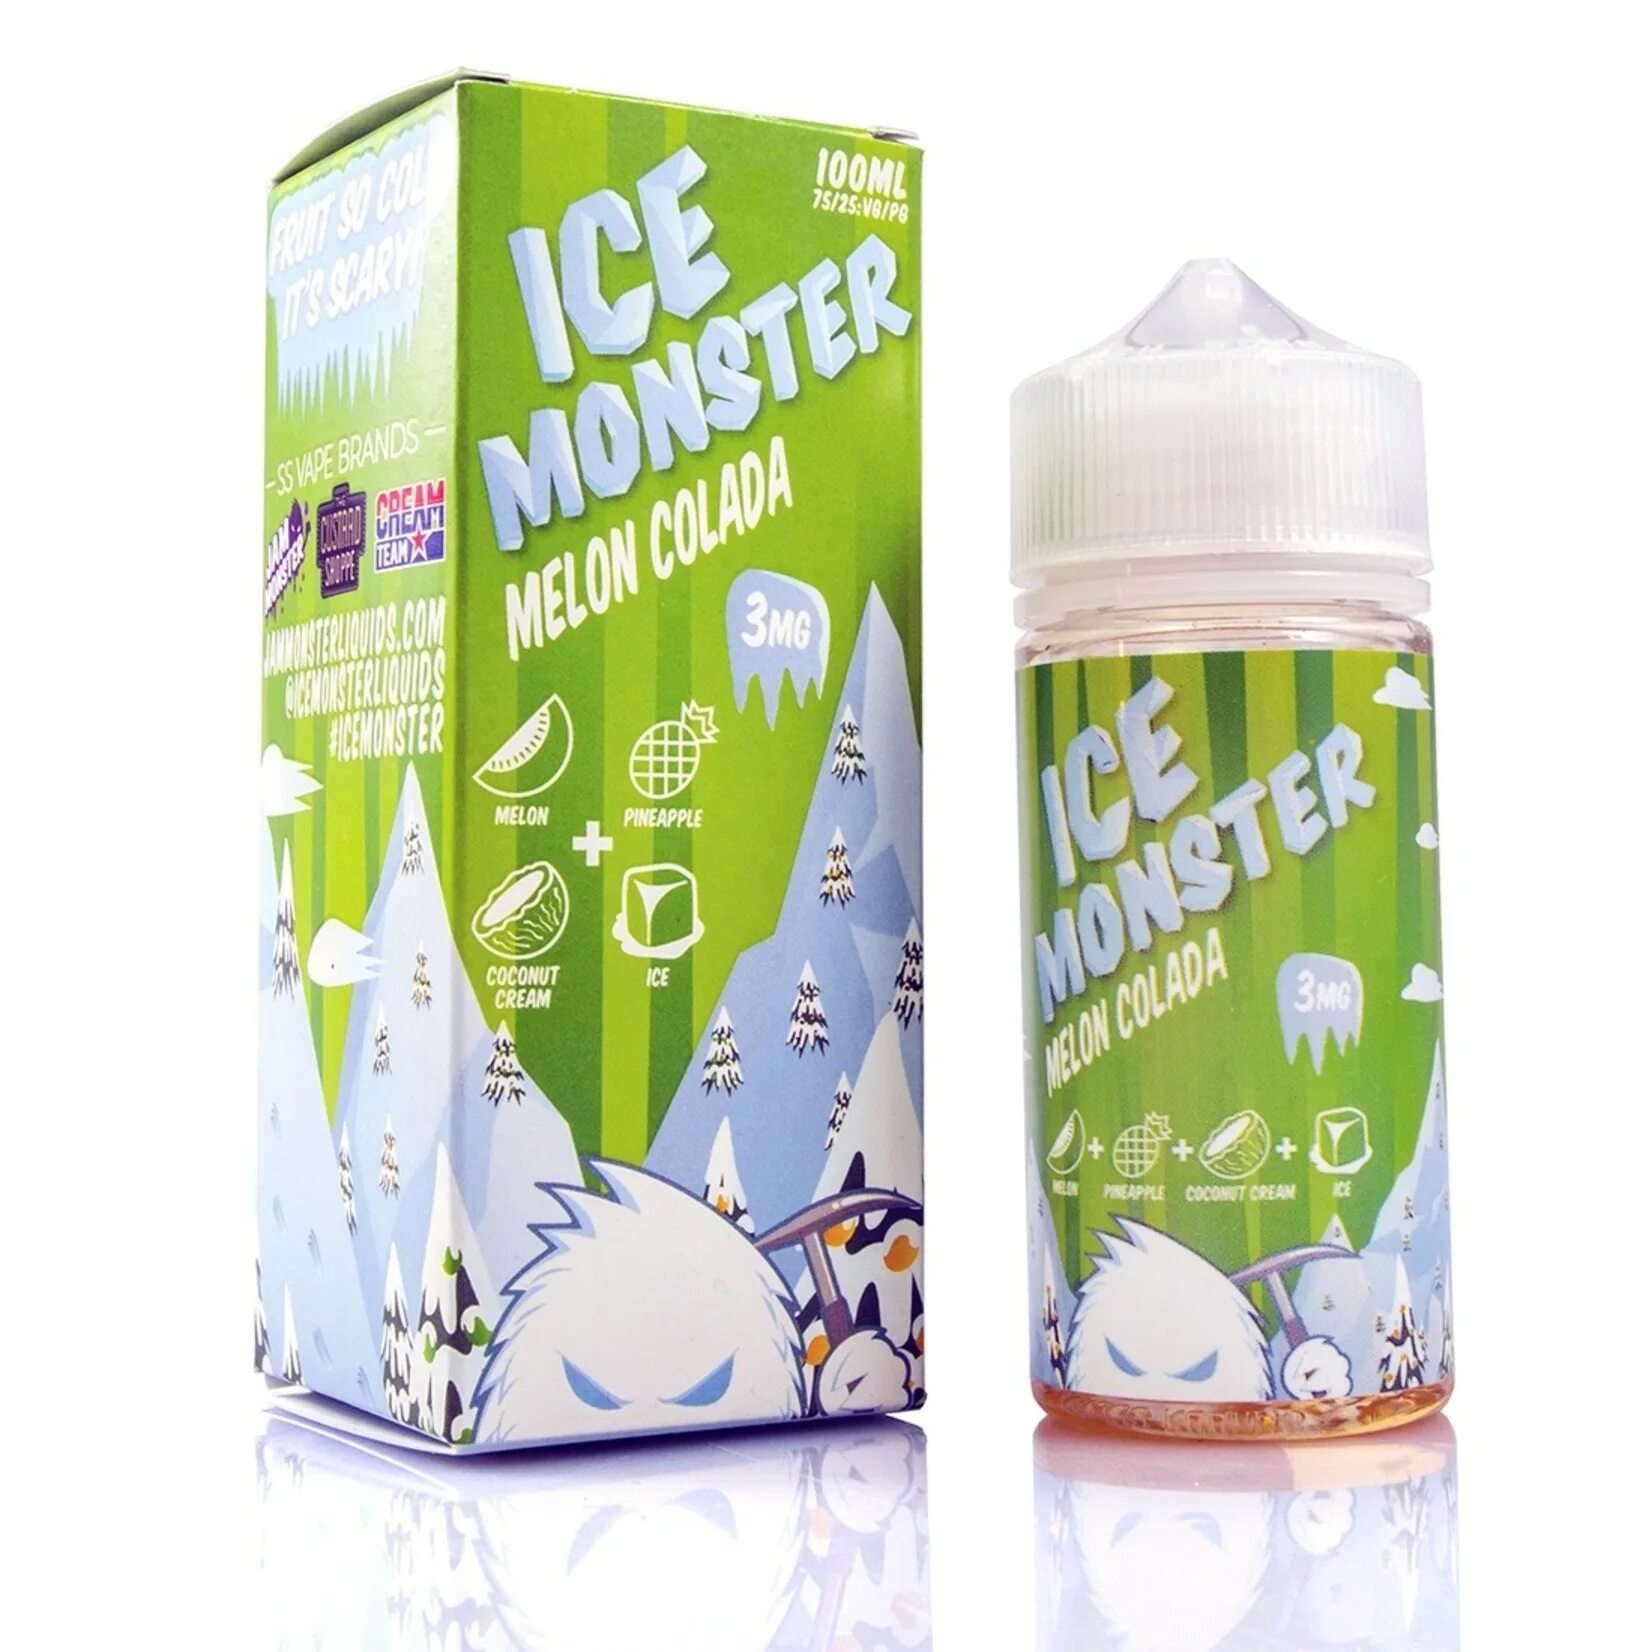 Ice only. The Ice Monster. Melon Ice. Ice Monster Classic Straw Melon Apple. Triple Melon Ice.